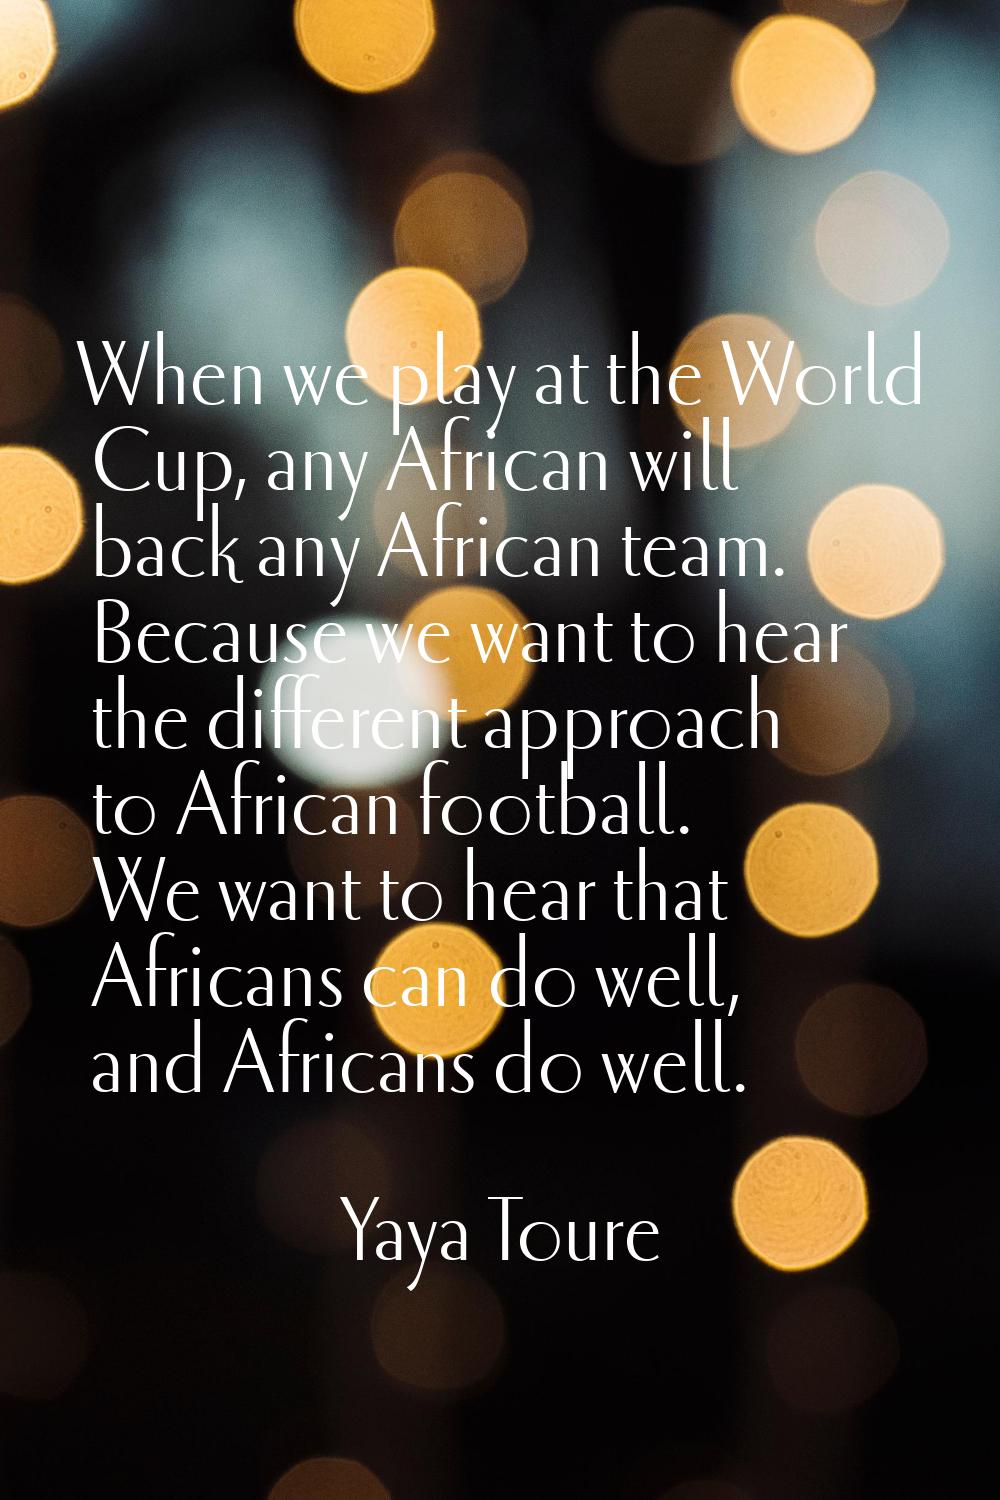 When we play at the World Cup, any African will back any African team. Because we want to hear the 